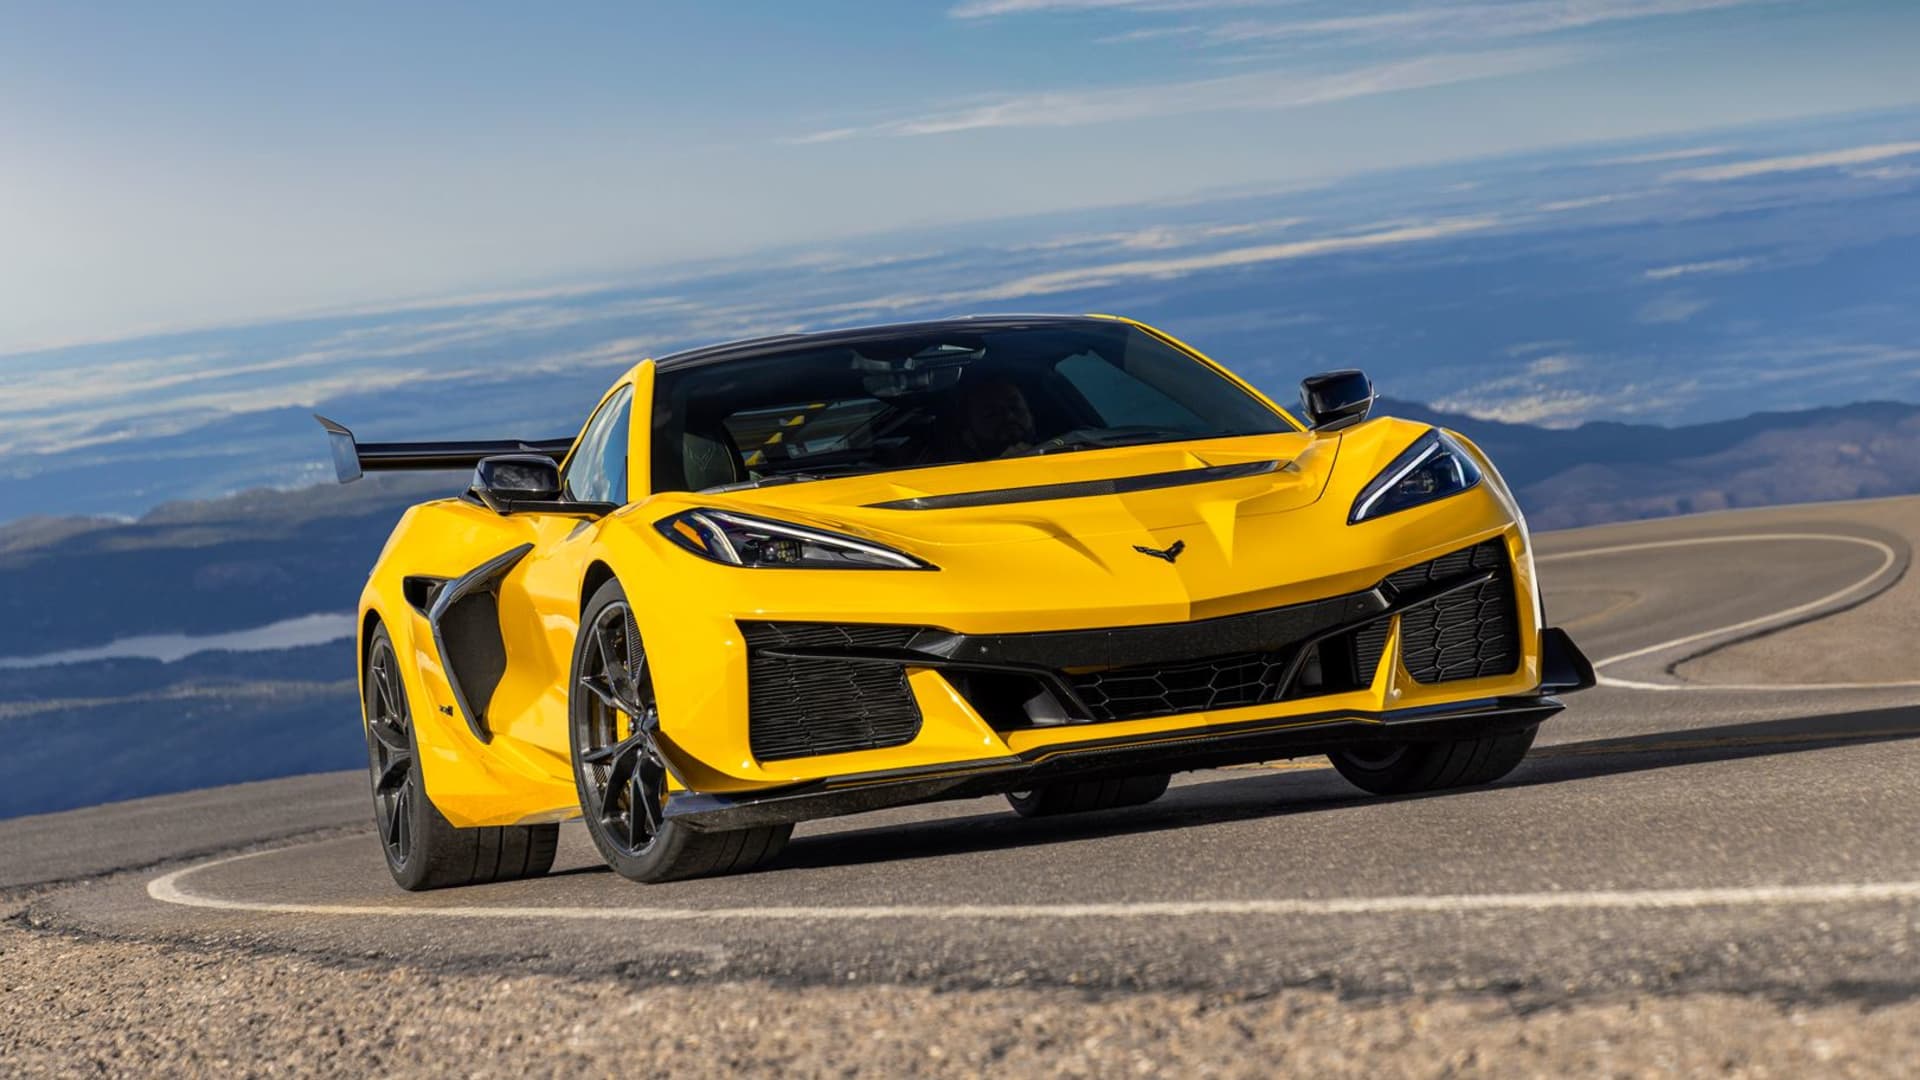 GM reveals new Chevy Corvette with 1,000-plus horsepower and record top speed